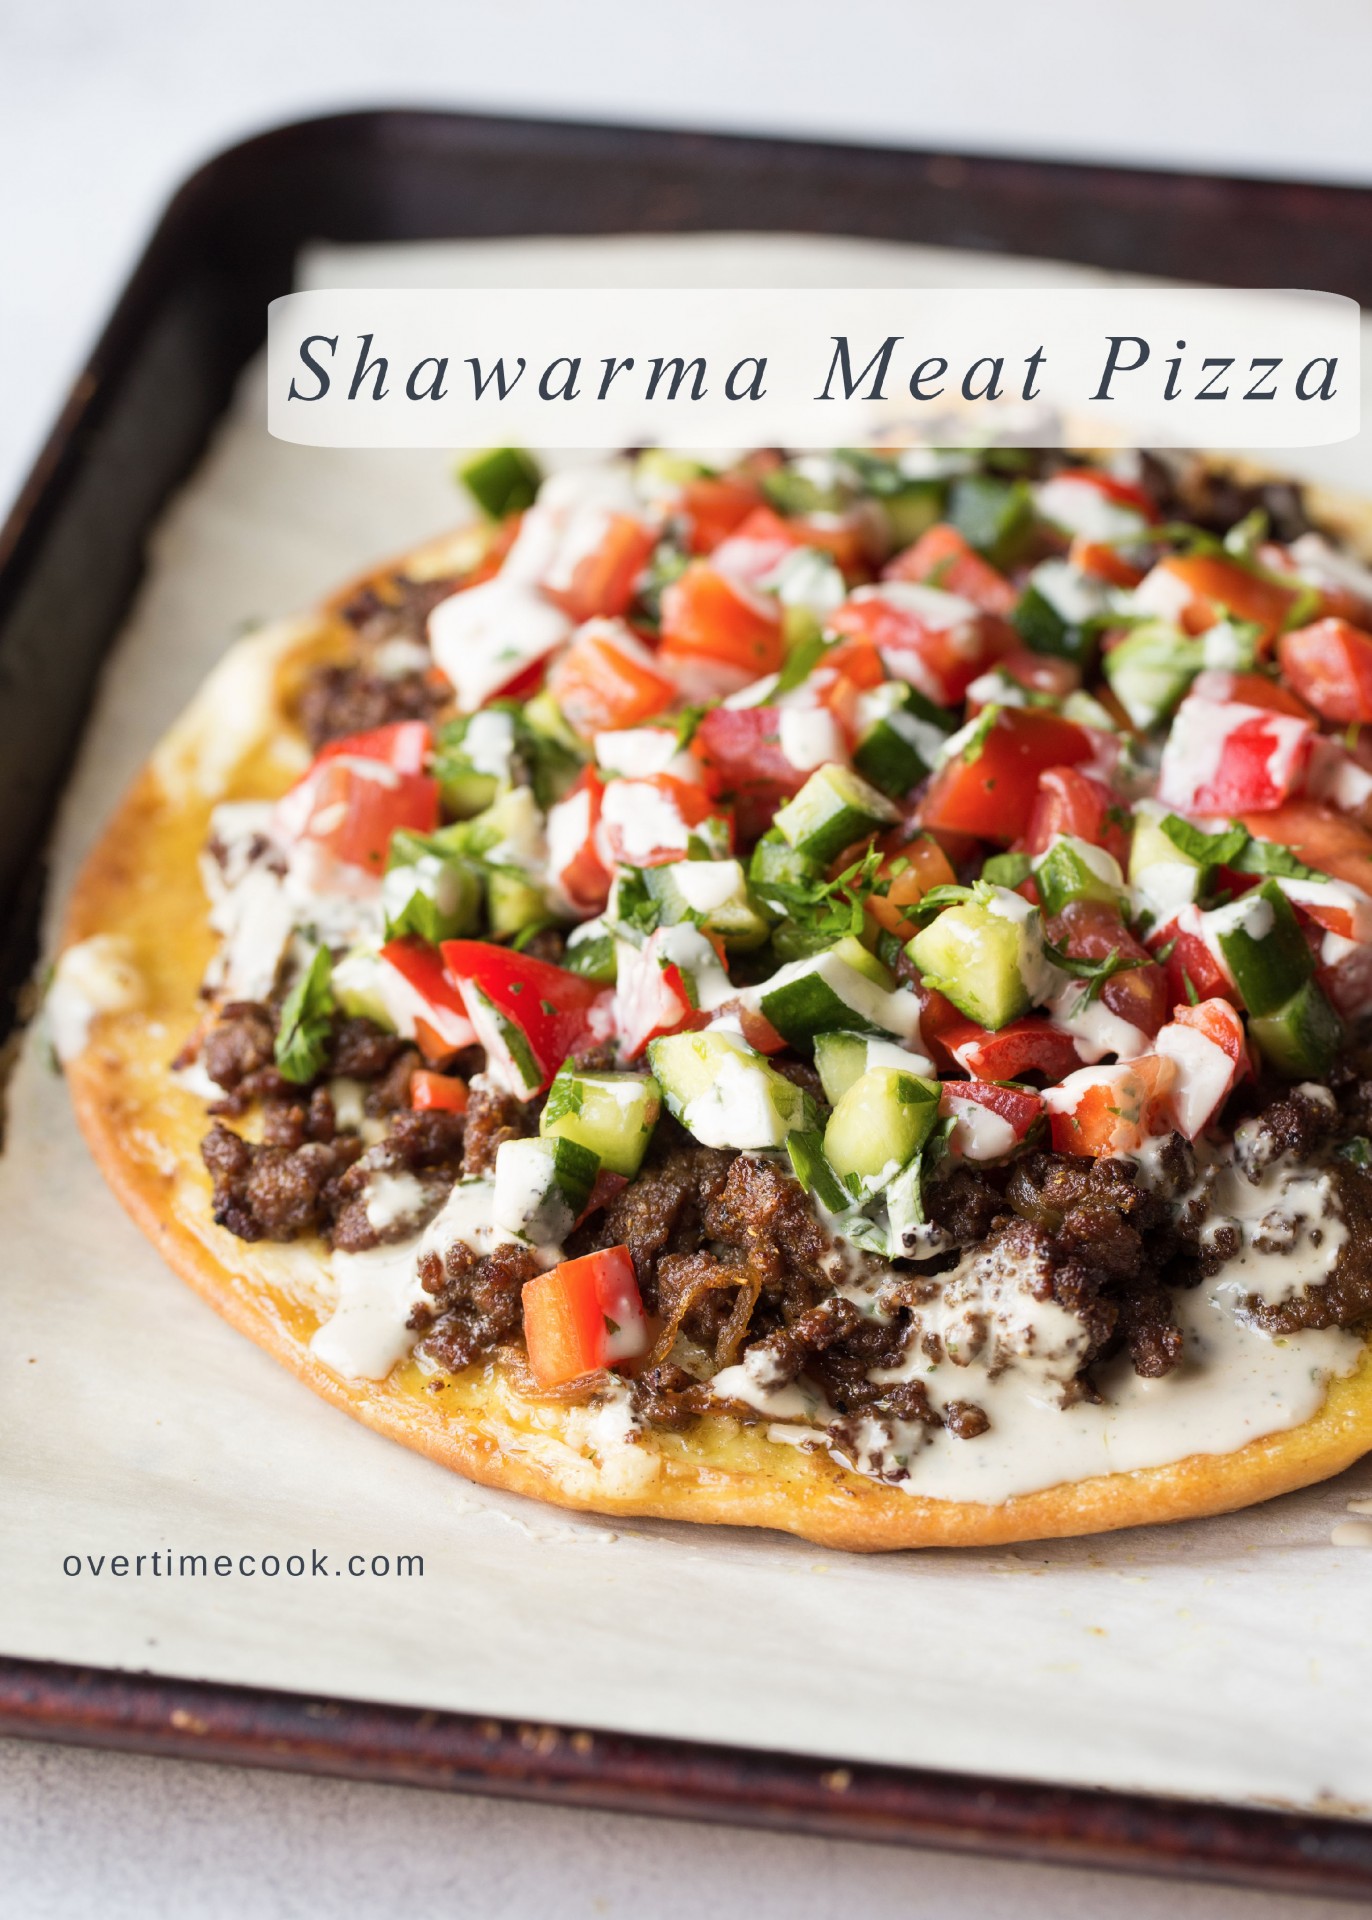 Kosher Meat Pizza Recipe: Delicious and Authentic Jewish-style Crust and Toppings